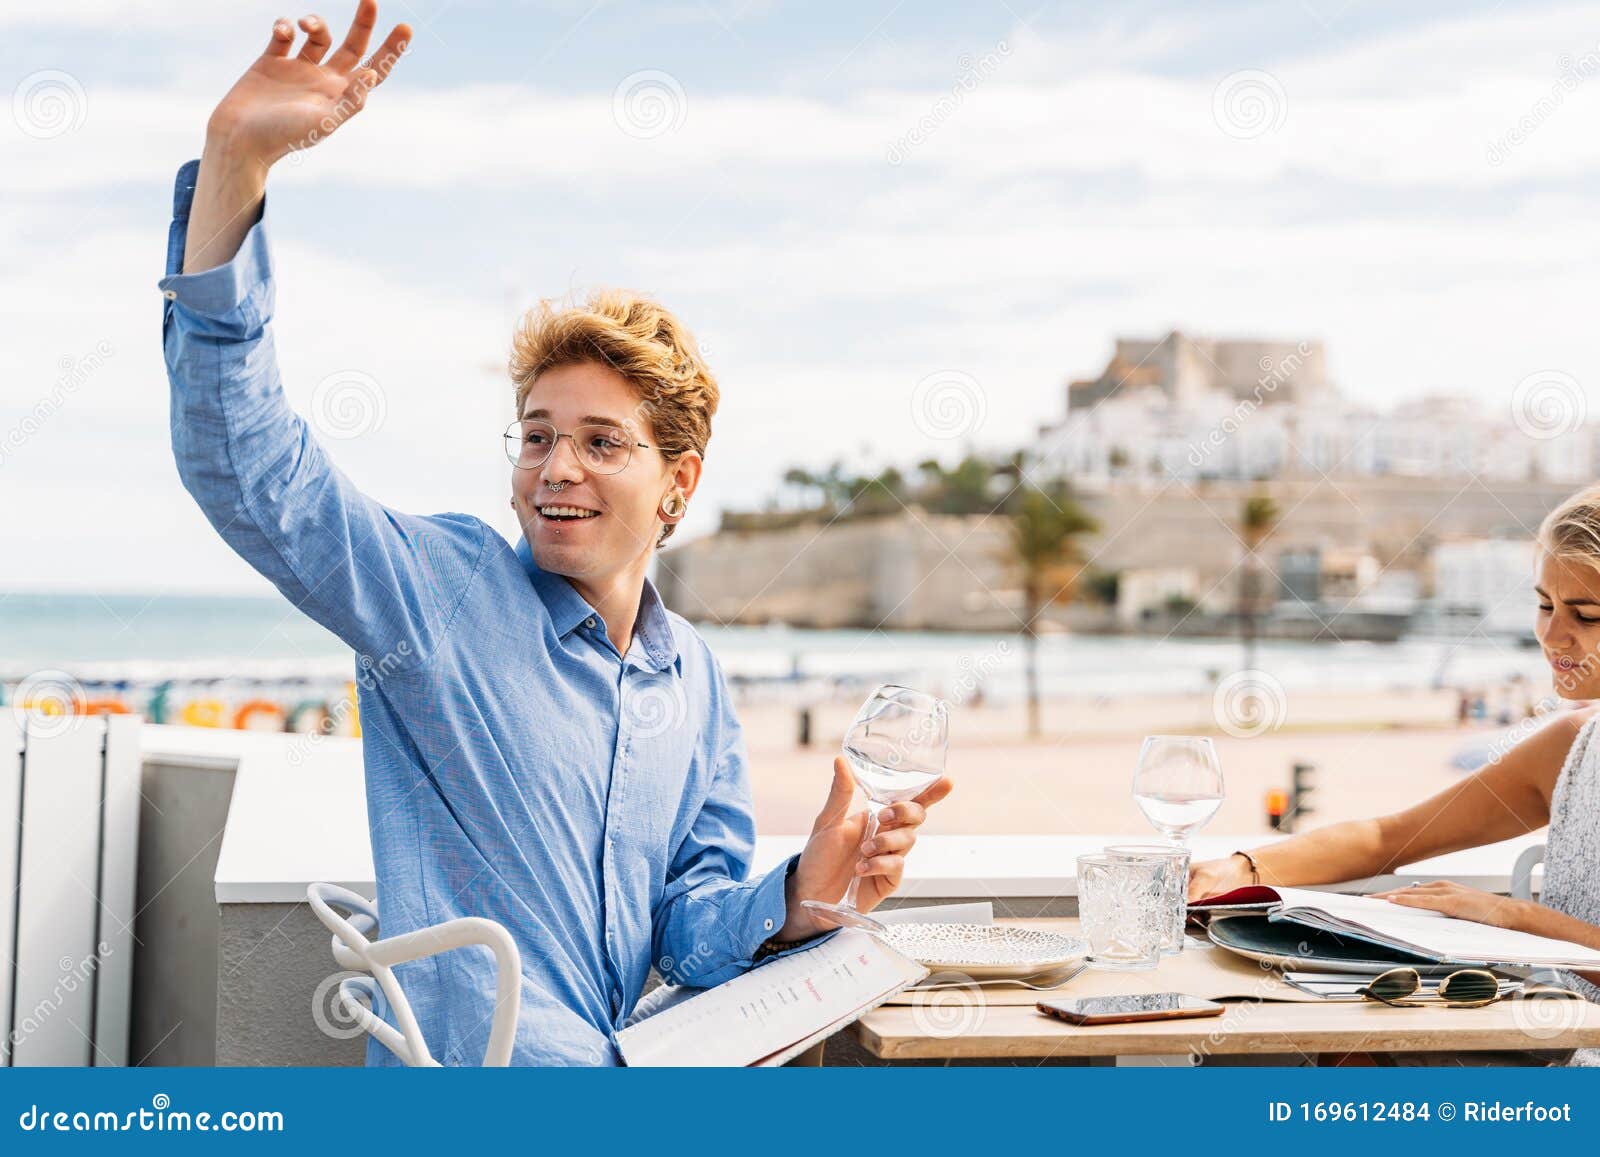 https://thumbs.dreamstime.com/z/guy-asking-waiter-outdoor-restaurant-date-young-girl-bride-groom-sitting-around-reading-documents-169612484.jpg